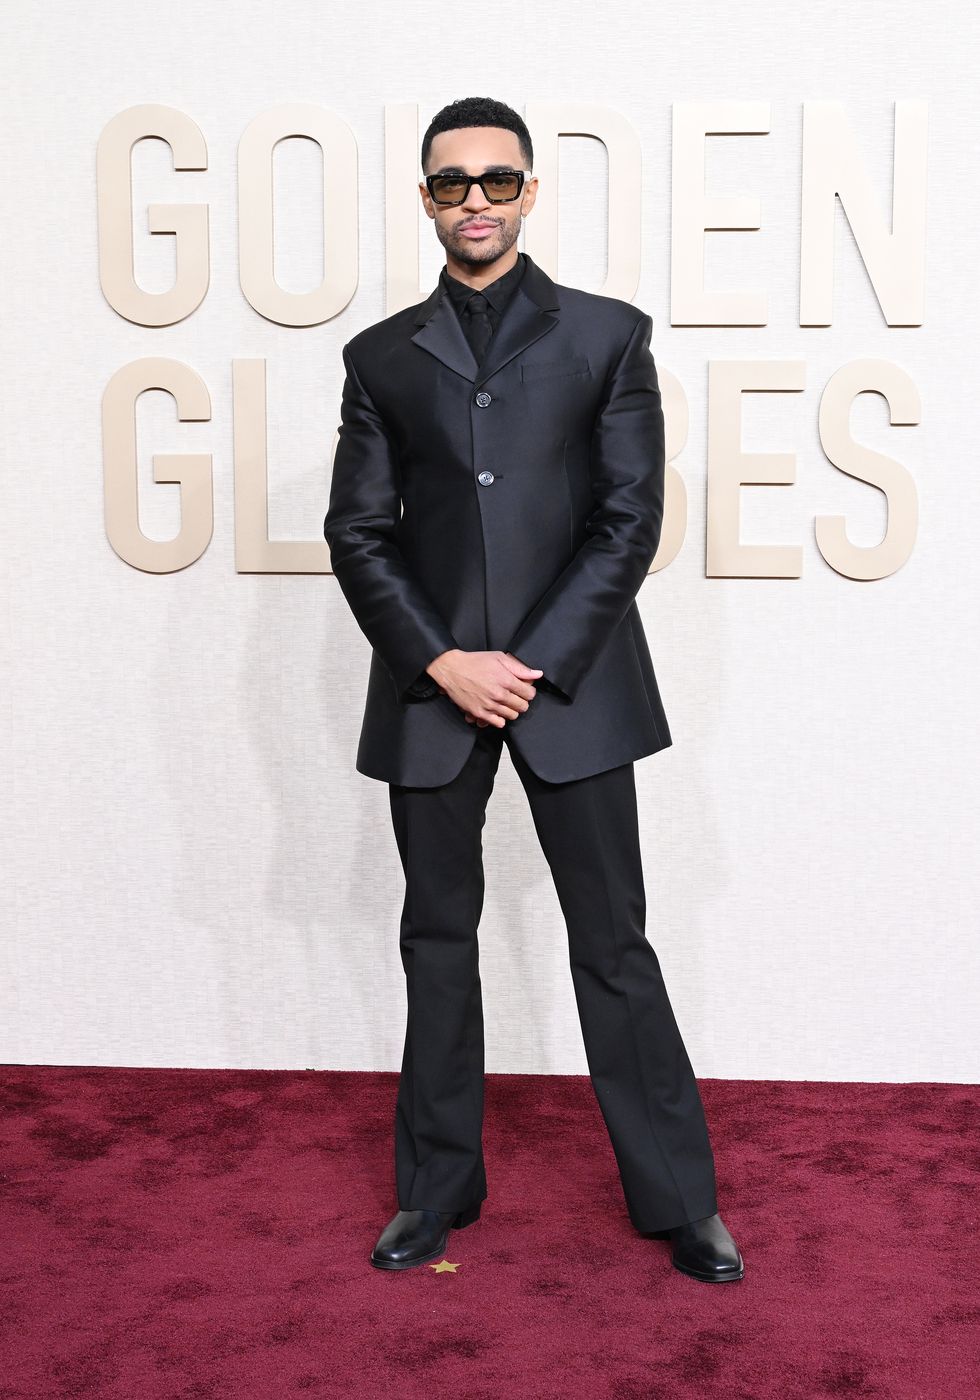 noah j ricketts at the 81st golden globe awards held at the beverly hilton hotel on january 7, 2024 in beverly hills, california photo by gilbert floresgolden globes 2024golden globes 2024 via getty images